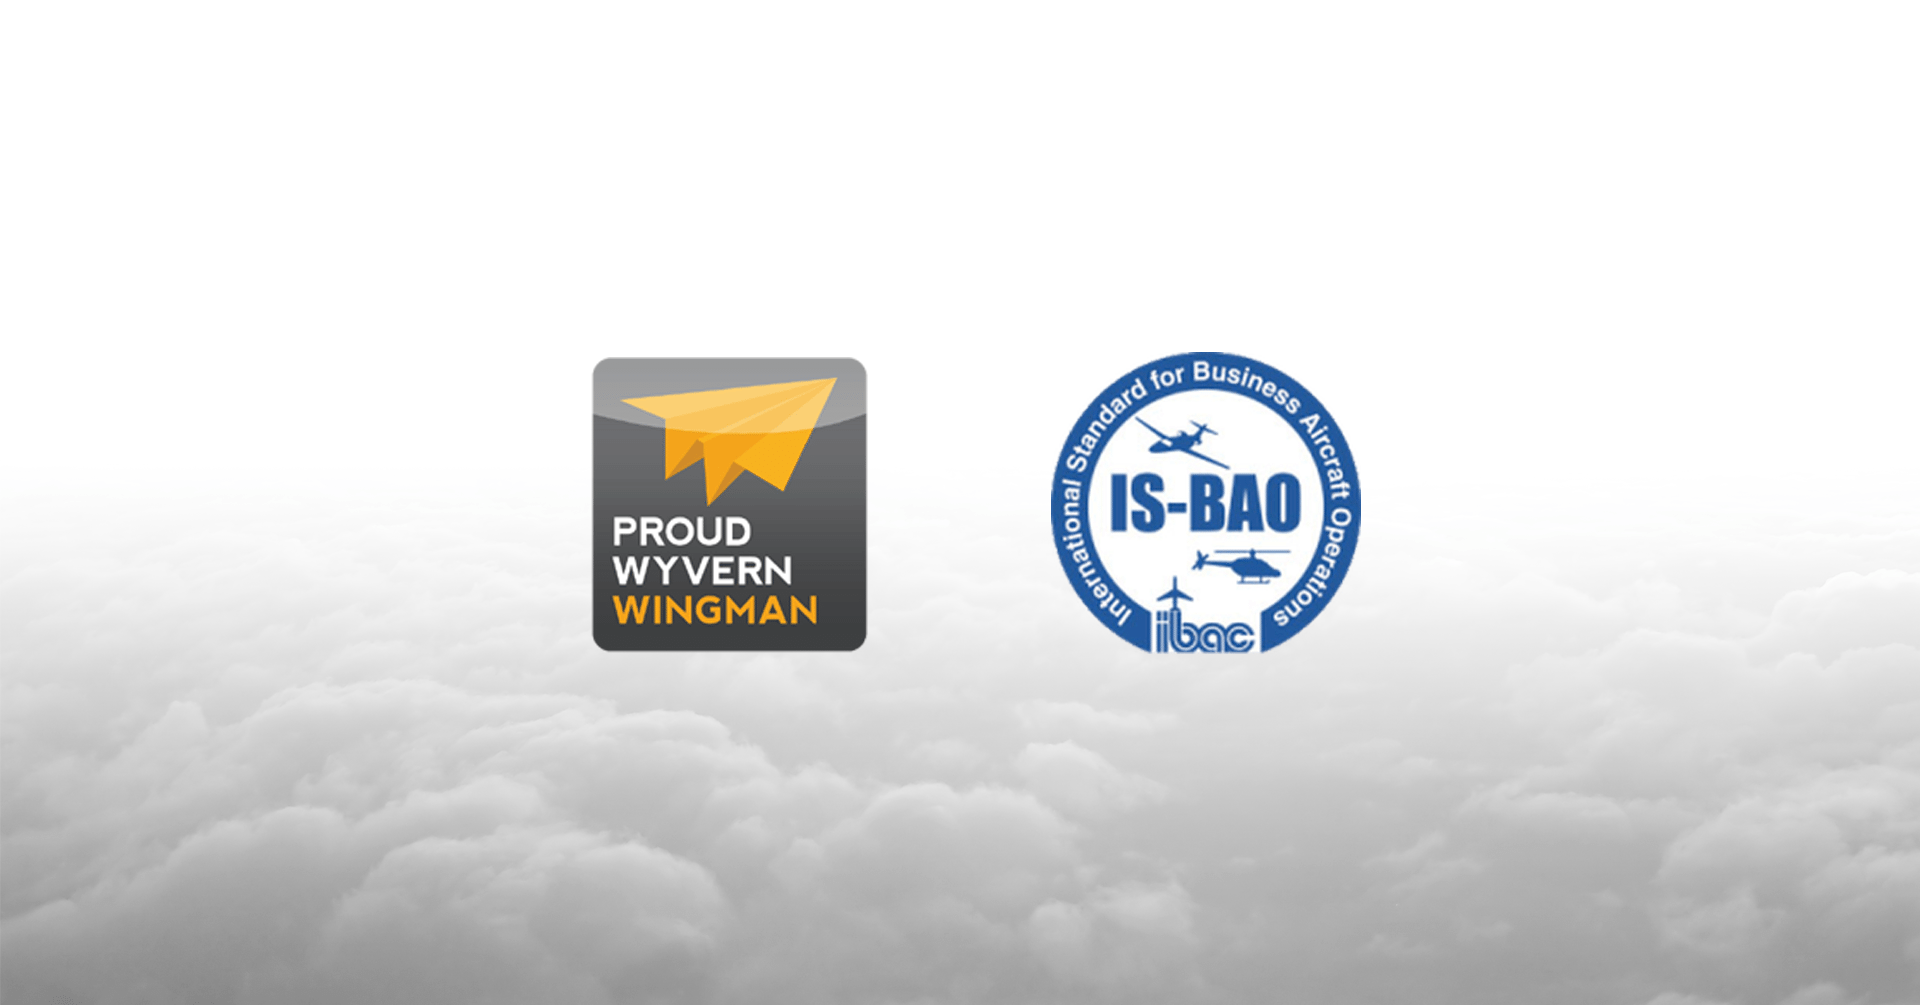 STA JETS Earns WYVERN Wingman status and IS-BAO Stage 2 Certification